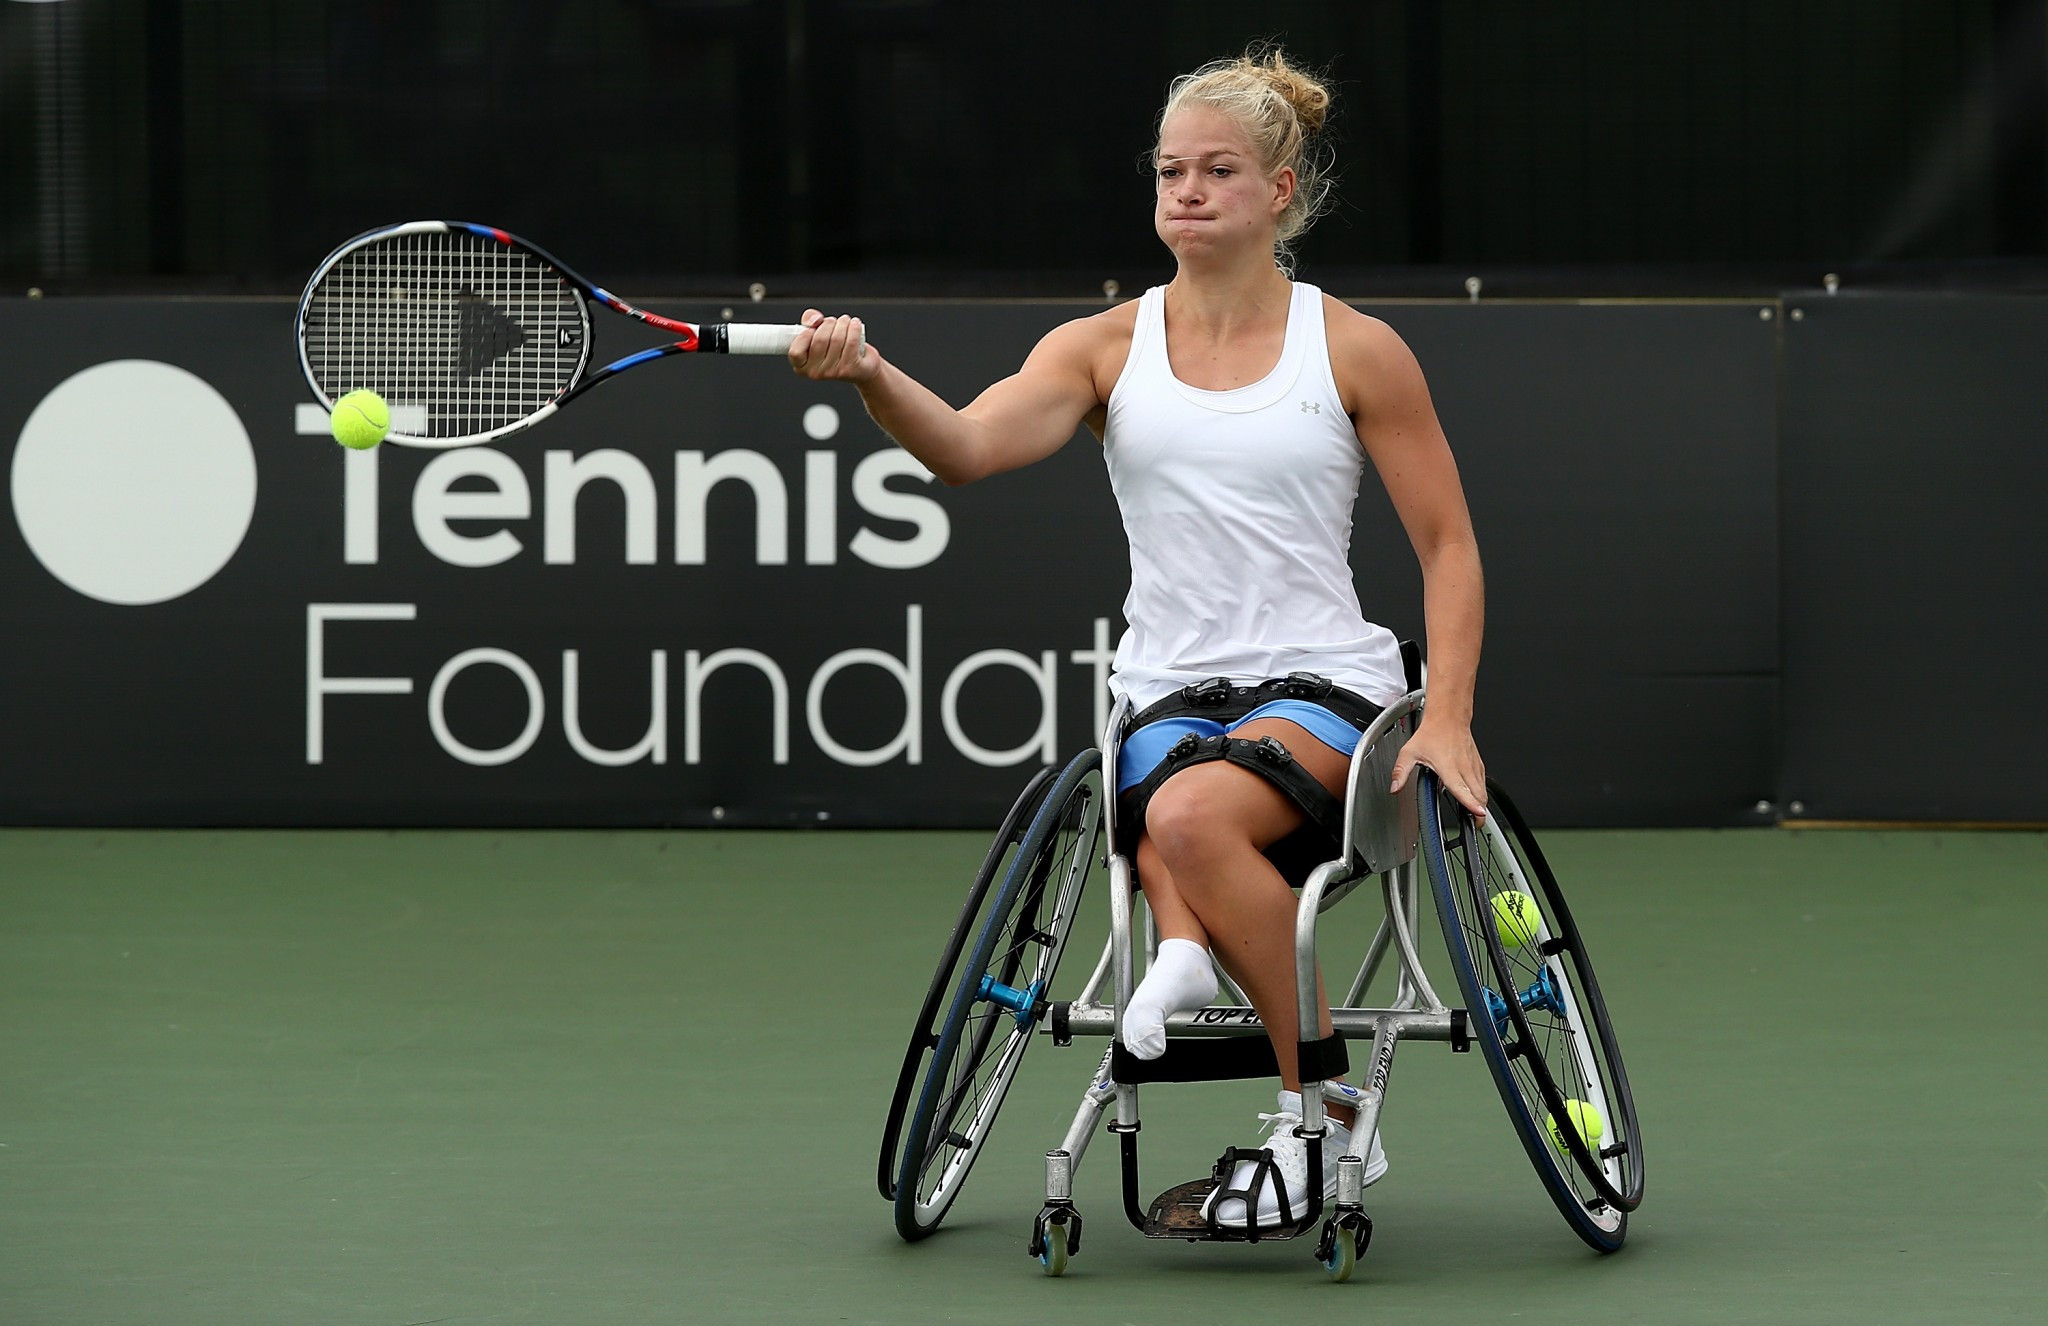 The Netherlands' Diede de Groot beat compatriot Marjolein Buis 7-5, 6-4 in their semi-final today ©Getty Images